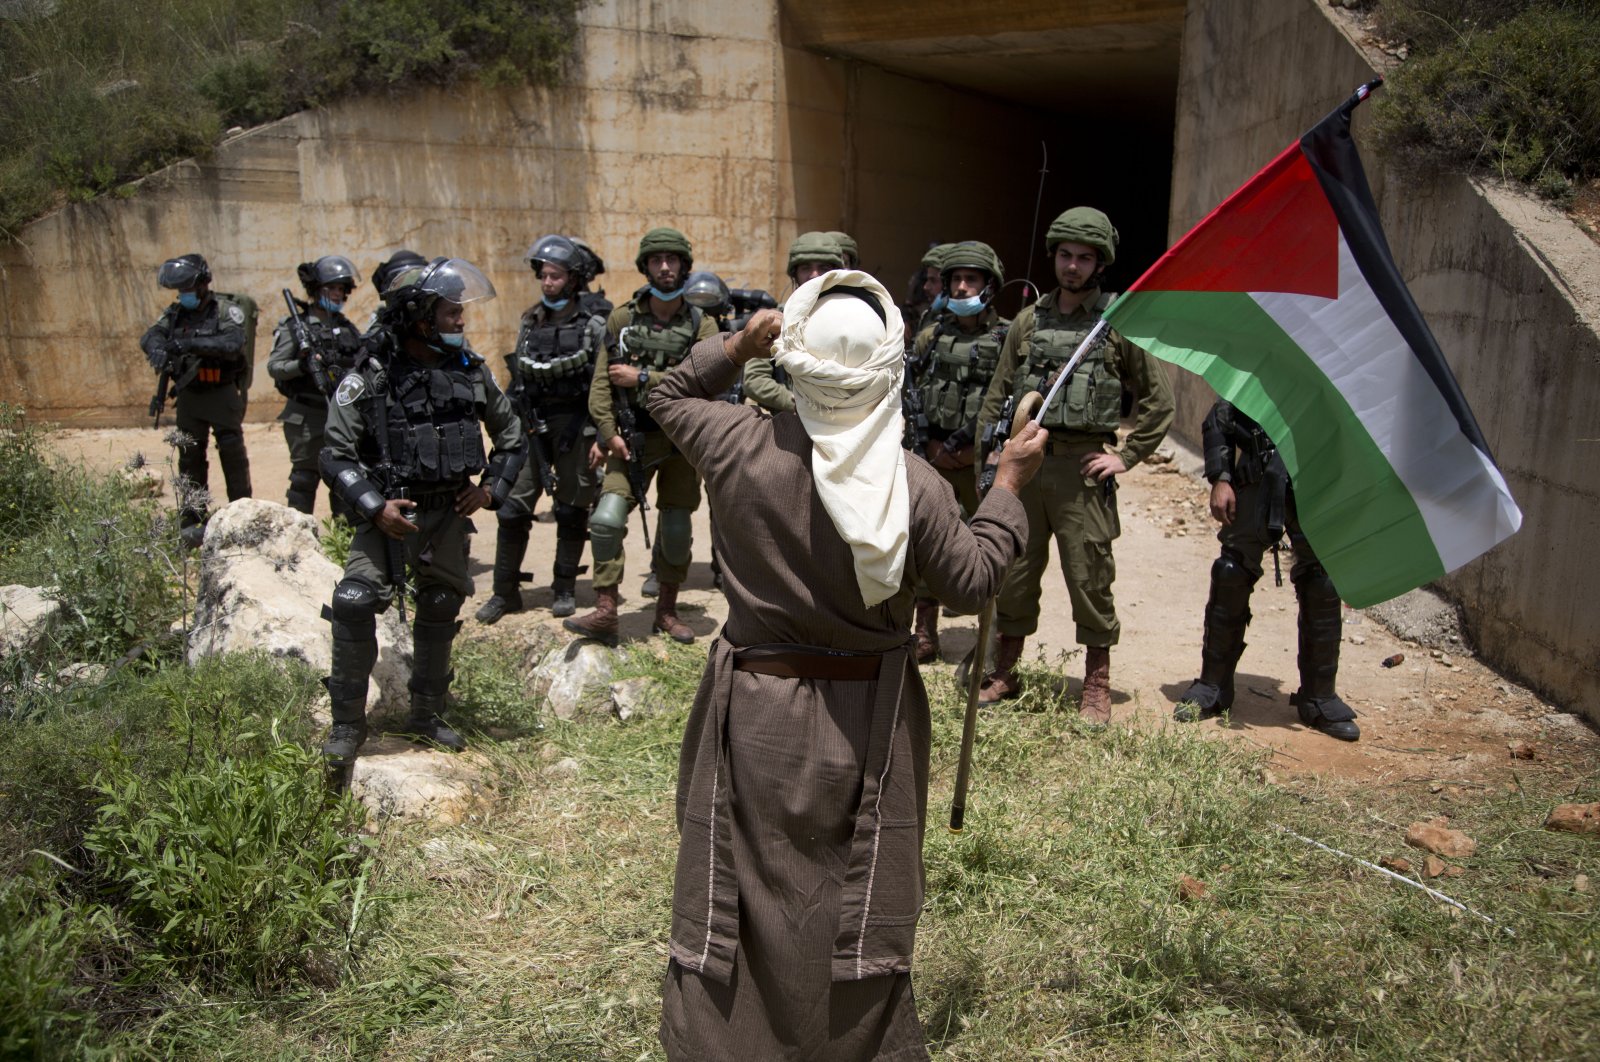 Palestinian holds national flag in fron of Israeli border police during a protest marking the 72nd anniversary "nakba," or catastrophe, near the West Bank city of Nablus, May 15, 2020. (AP)